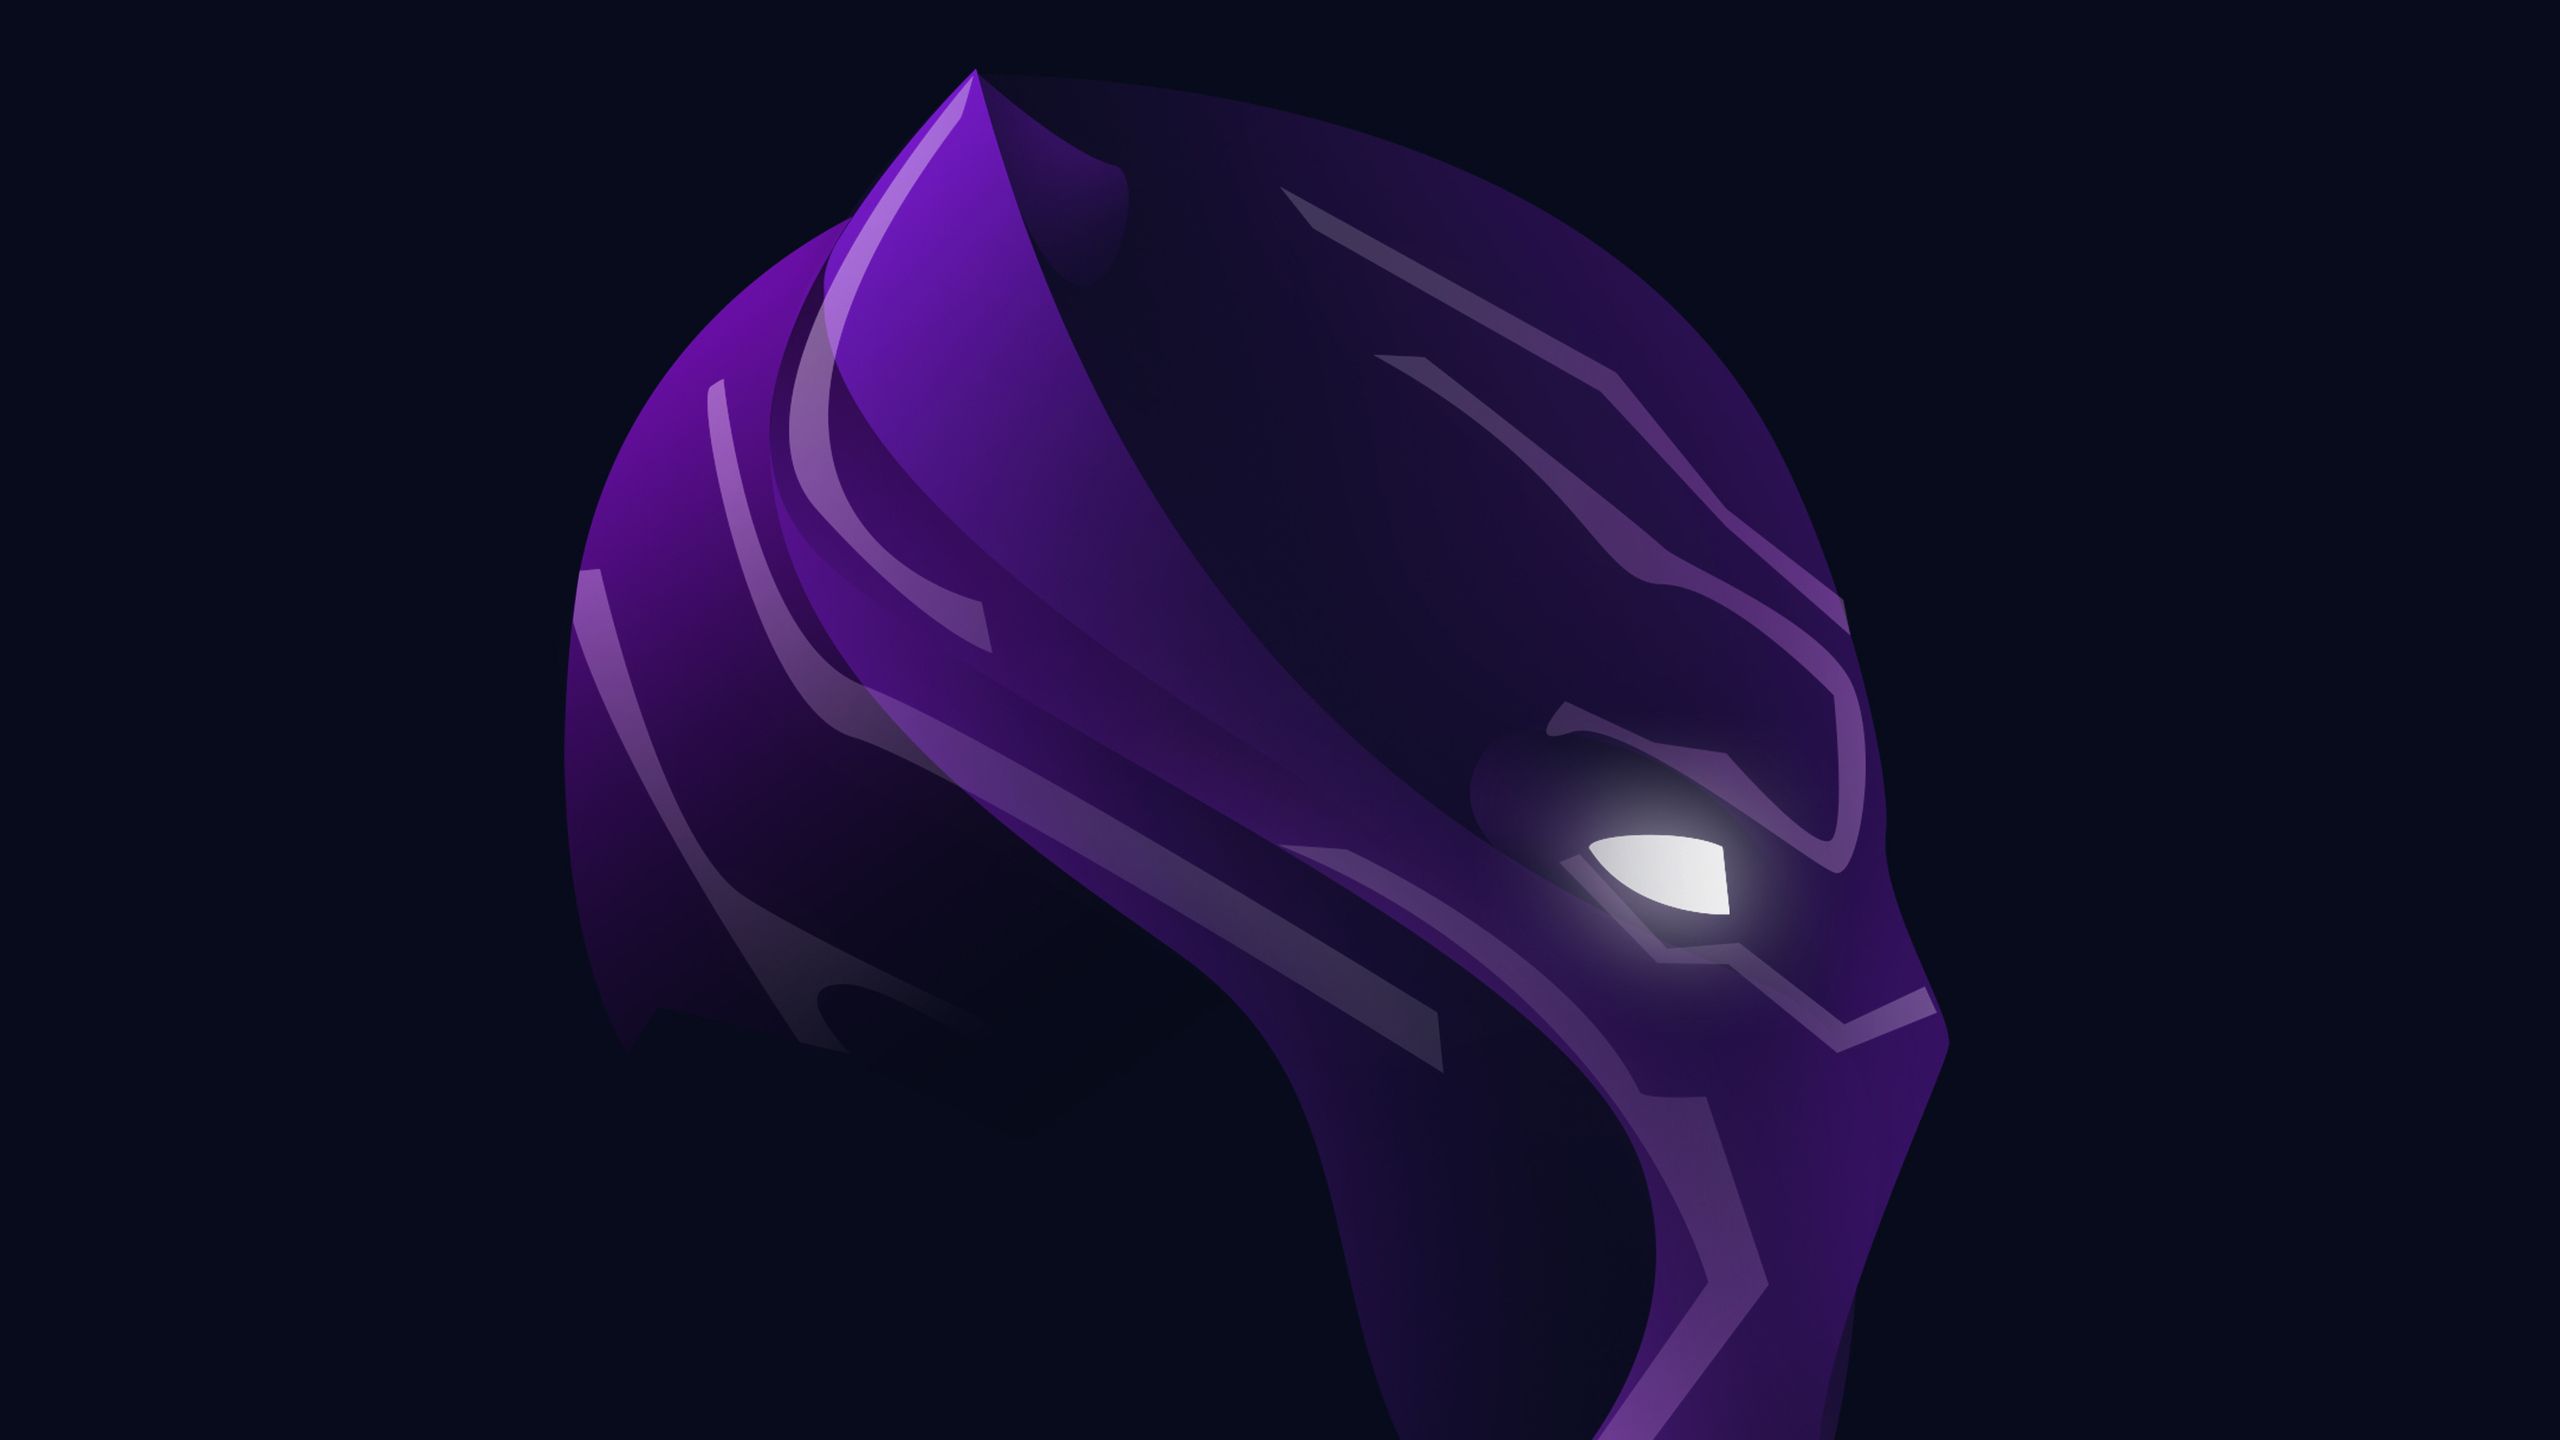 Black Panther Face Wallpapers - Wallpaper Cave